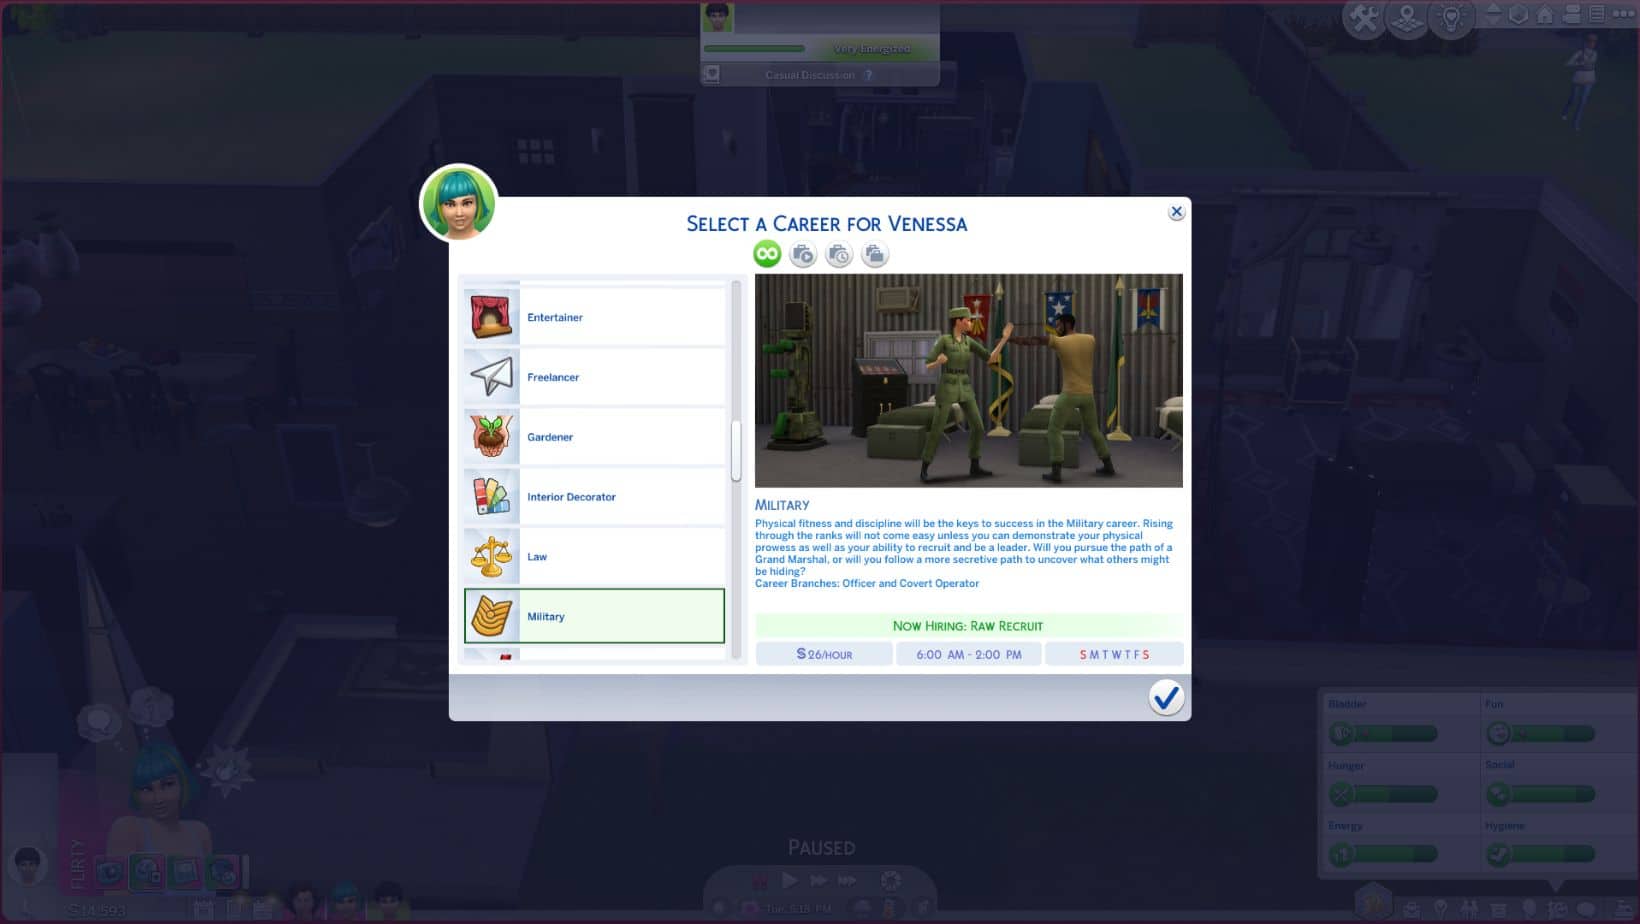 The military career gives the most amount of money in The Sims 4.